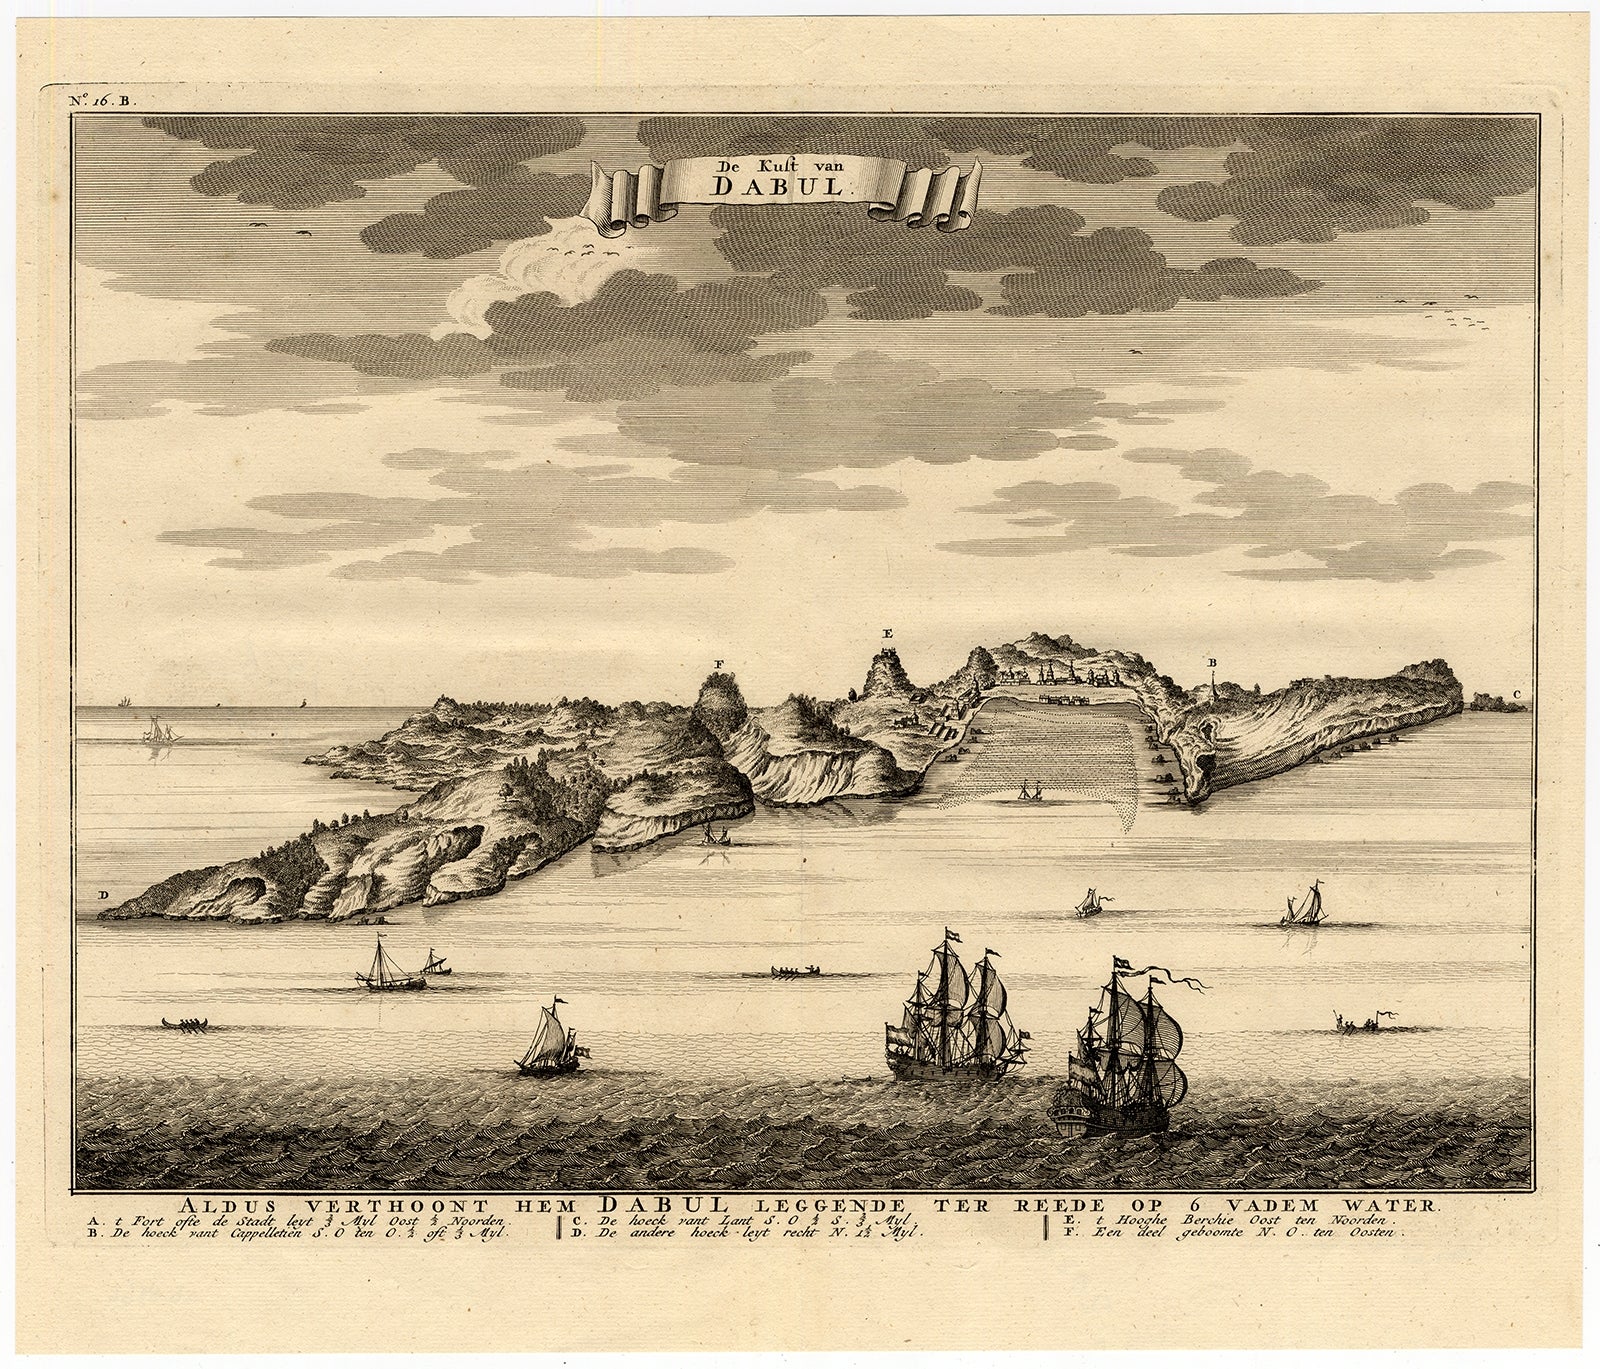 Antique print titled 'De Kust van Dabul'. Antique print depicting the coast of Dabhol / Dabul in India. This print originates from 'Oud en Nieuw Oost-Indiën' by F. Valentijn.

Artists and Engravers: The author François Valentijn (1666-1727), was a